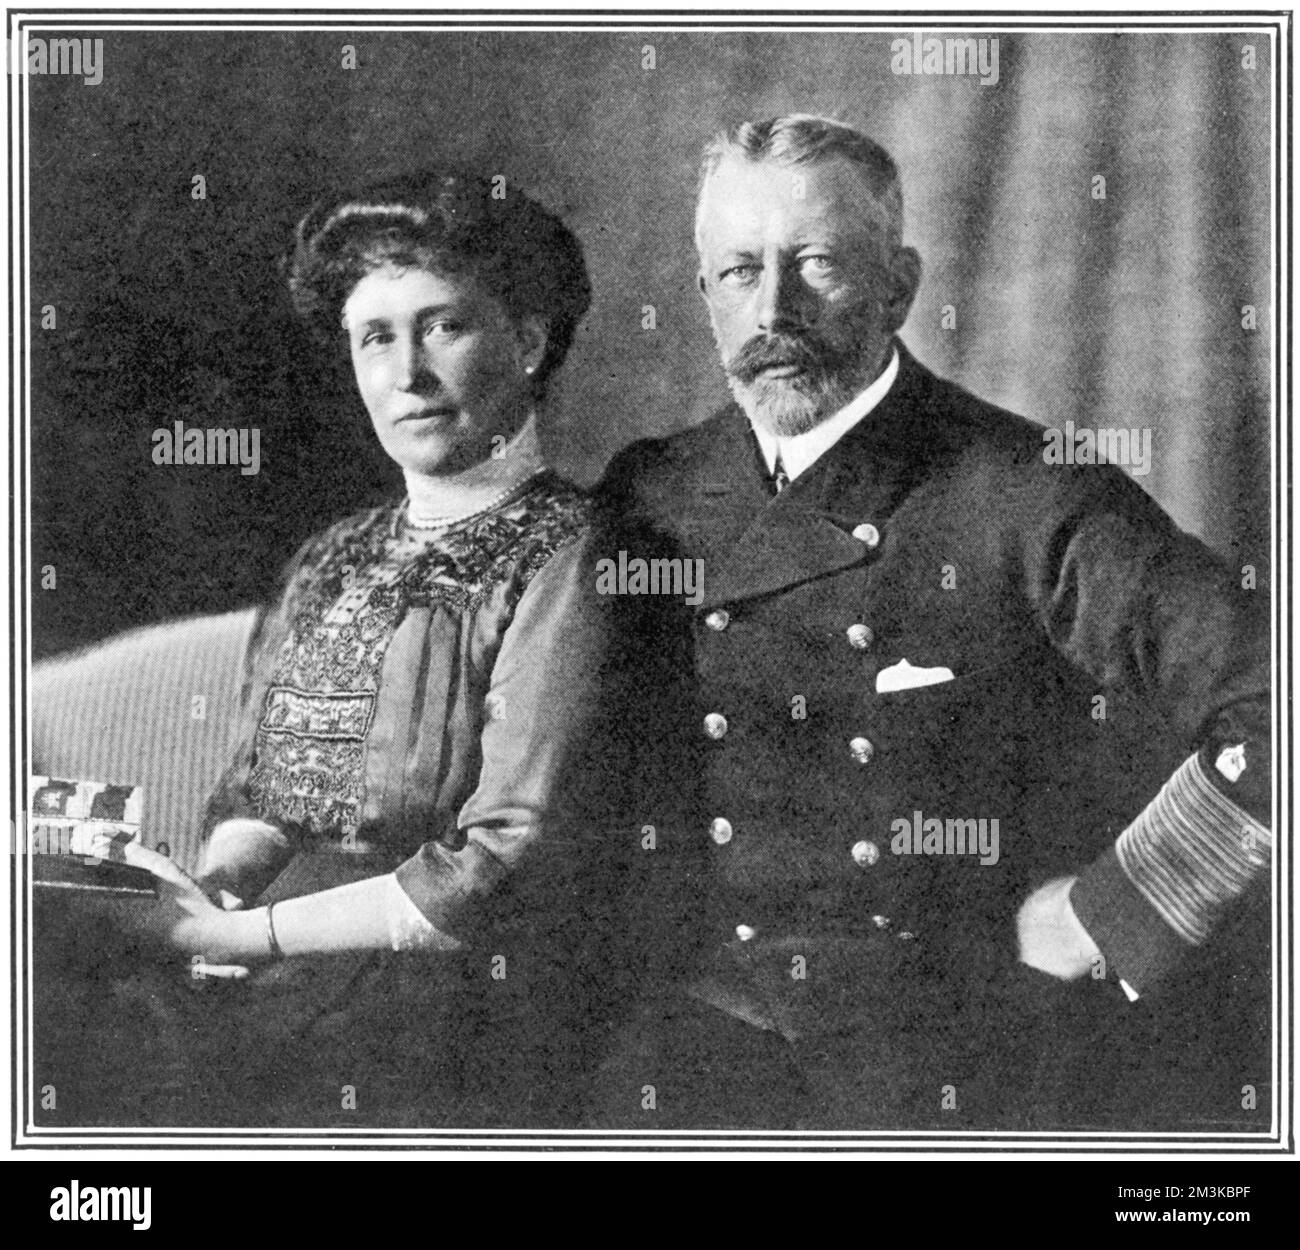 Prince Henry (Heinrich) of Prussia (1862 - 1929), younger brother of Kaiser Wilhelm, pictured with his wife, Princess Irene of Hesse-Darmstadt (1866 - 1953), third daughter of Princess Alice of Hesse-Darmstadt, pictured together at the time of their Silver Wedding anniversary in 1913     Date: 1913 Stock Photo